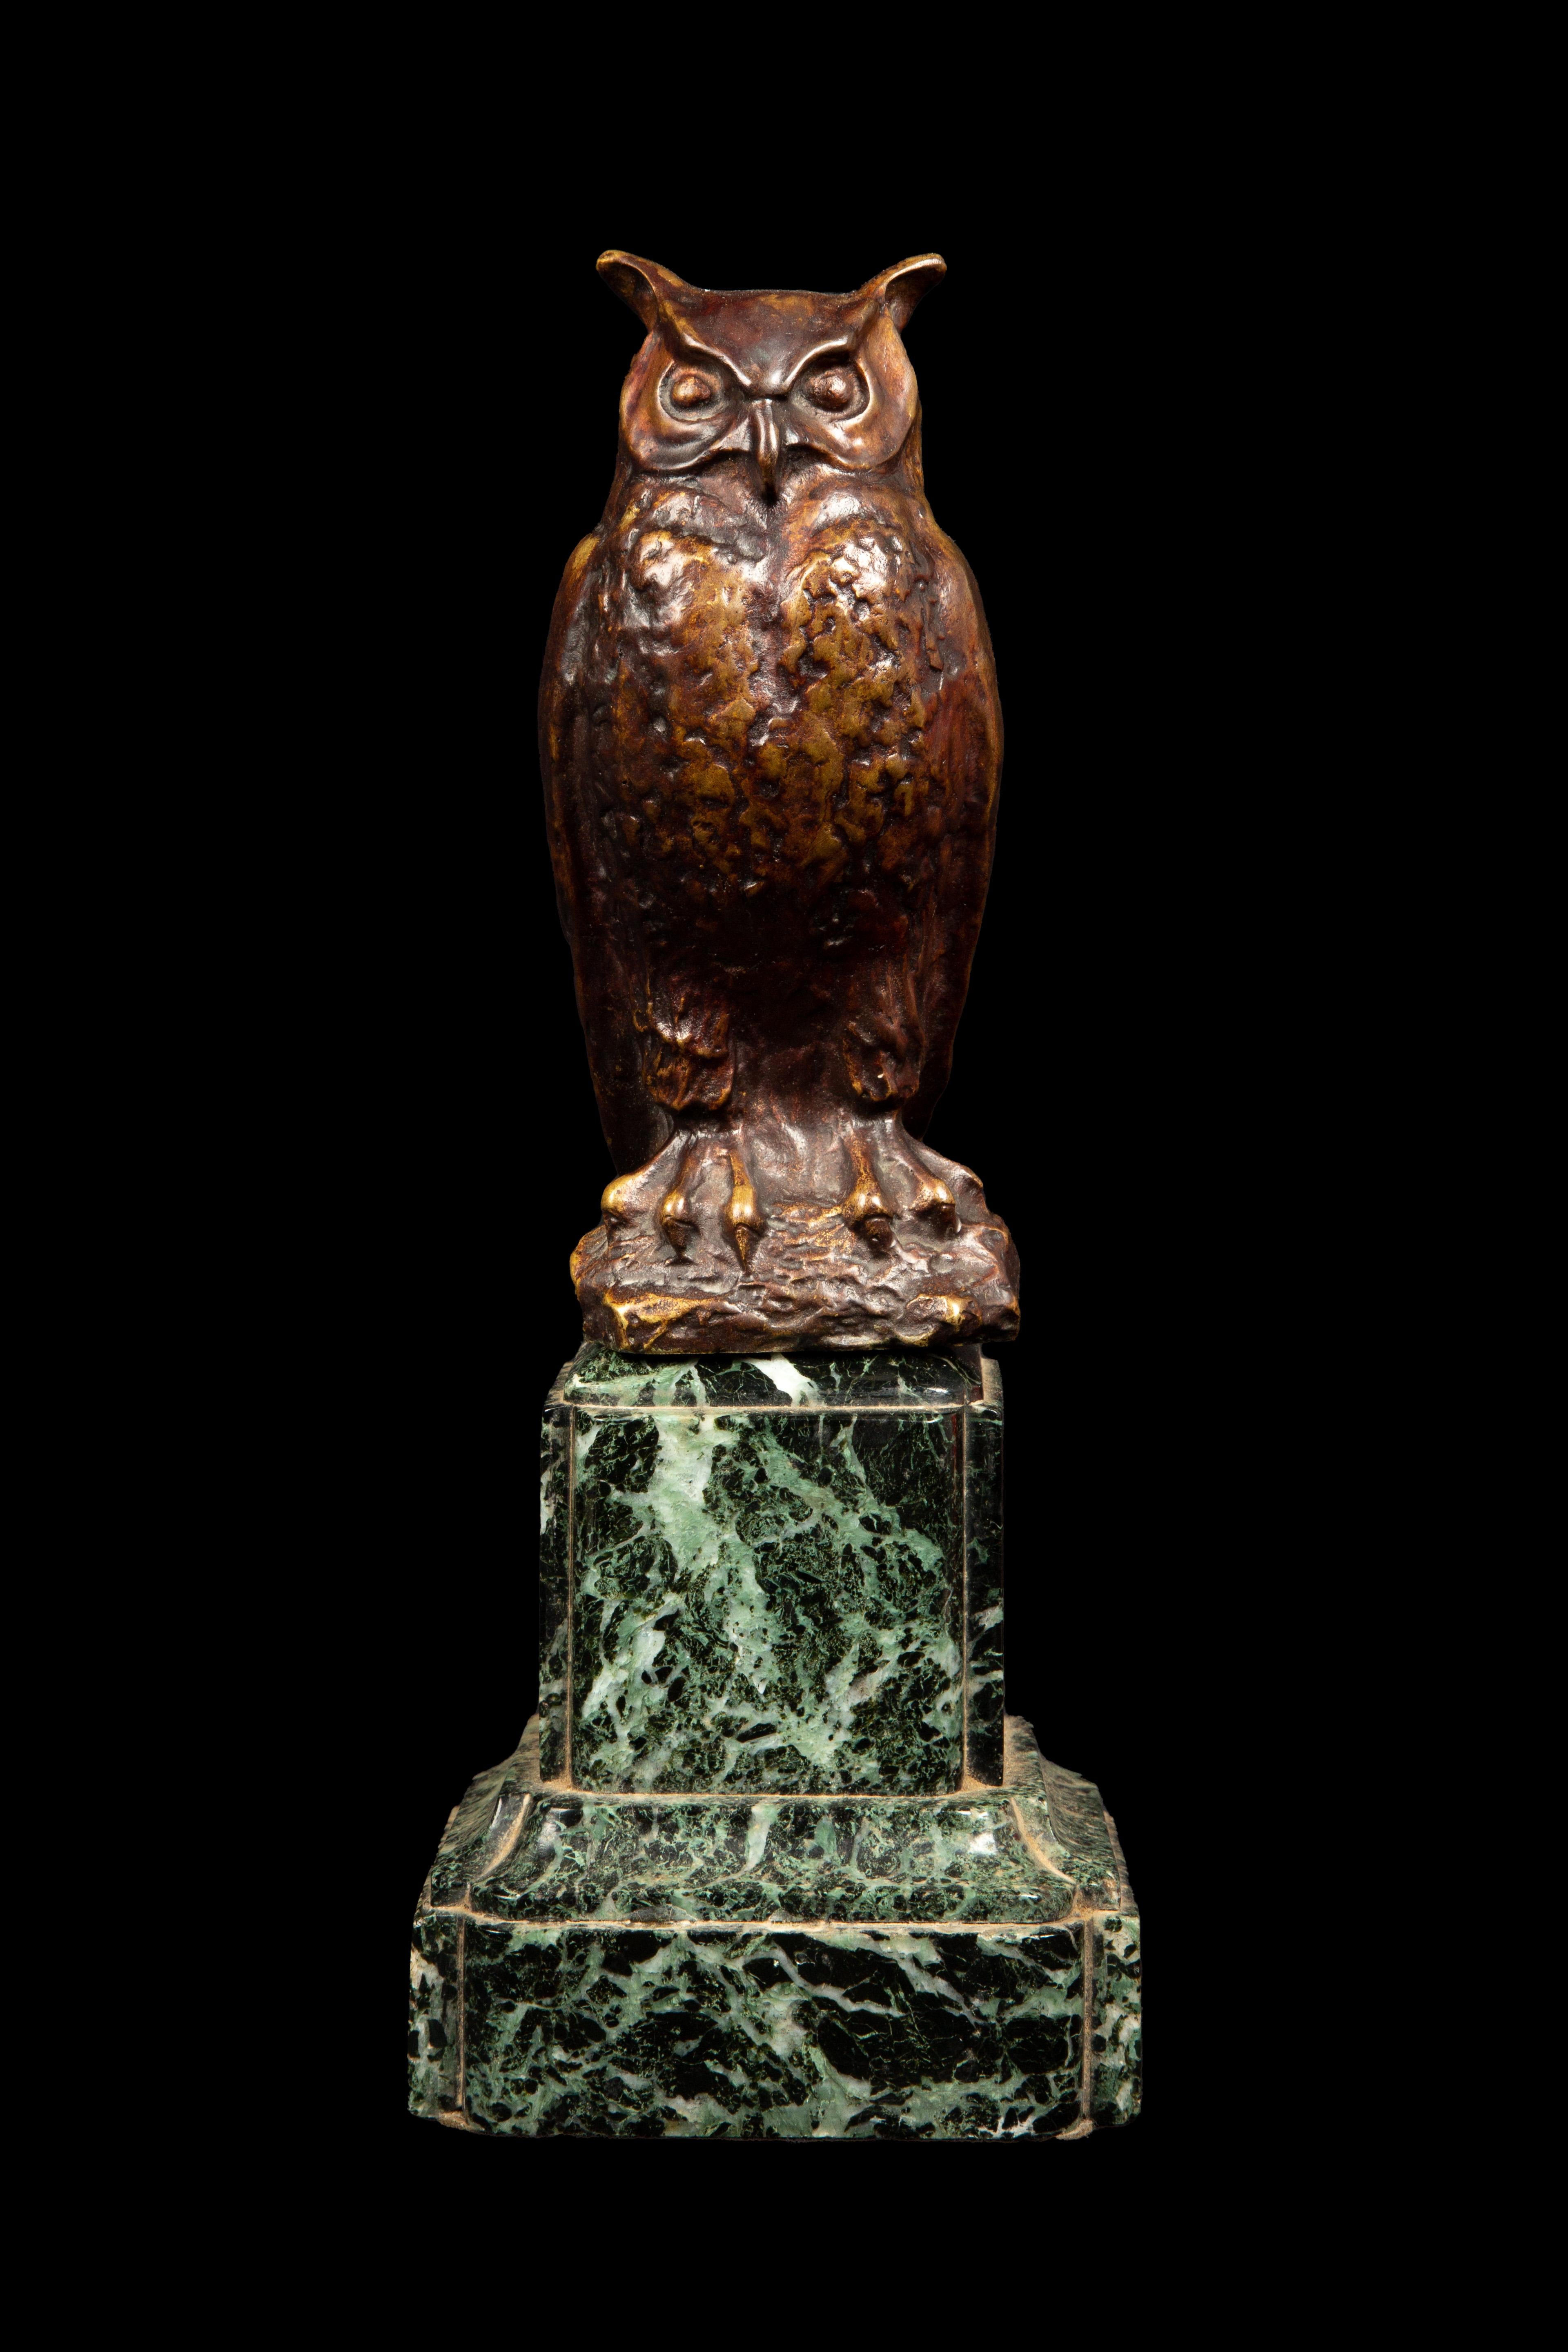 Max Le Verrier (1891 - 1973) was a famous French artist known for creating stunning bronze sculptures. One of his remarkable pieces is this owl sculpture made of bronze with a brown patina, placed on a green marble base. It stands at 11 inches tall